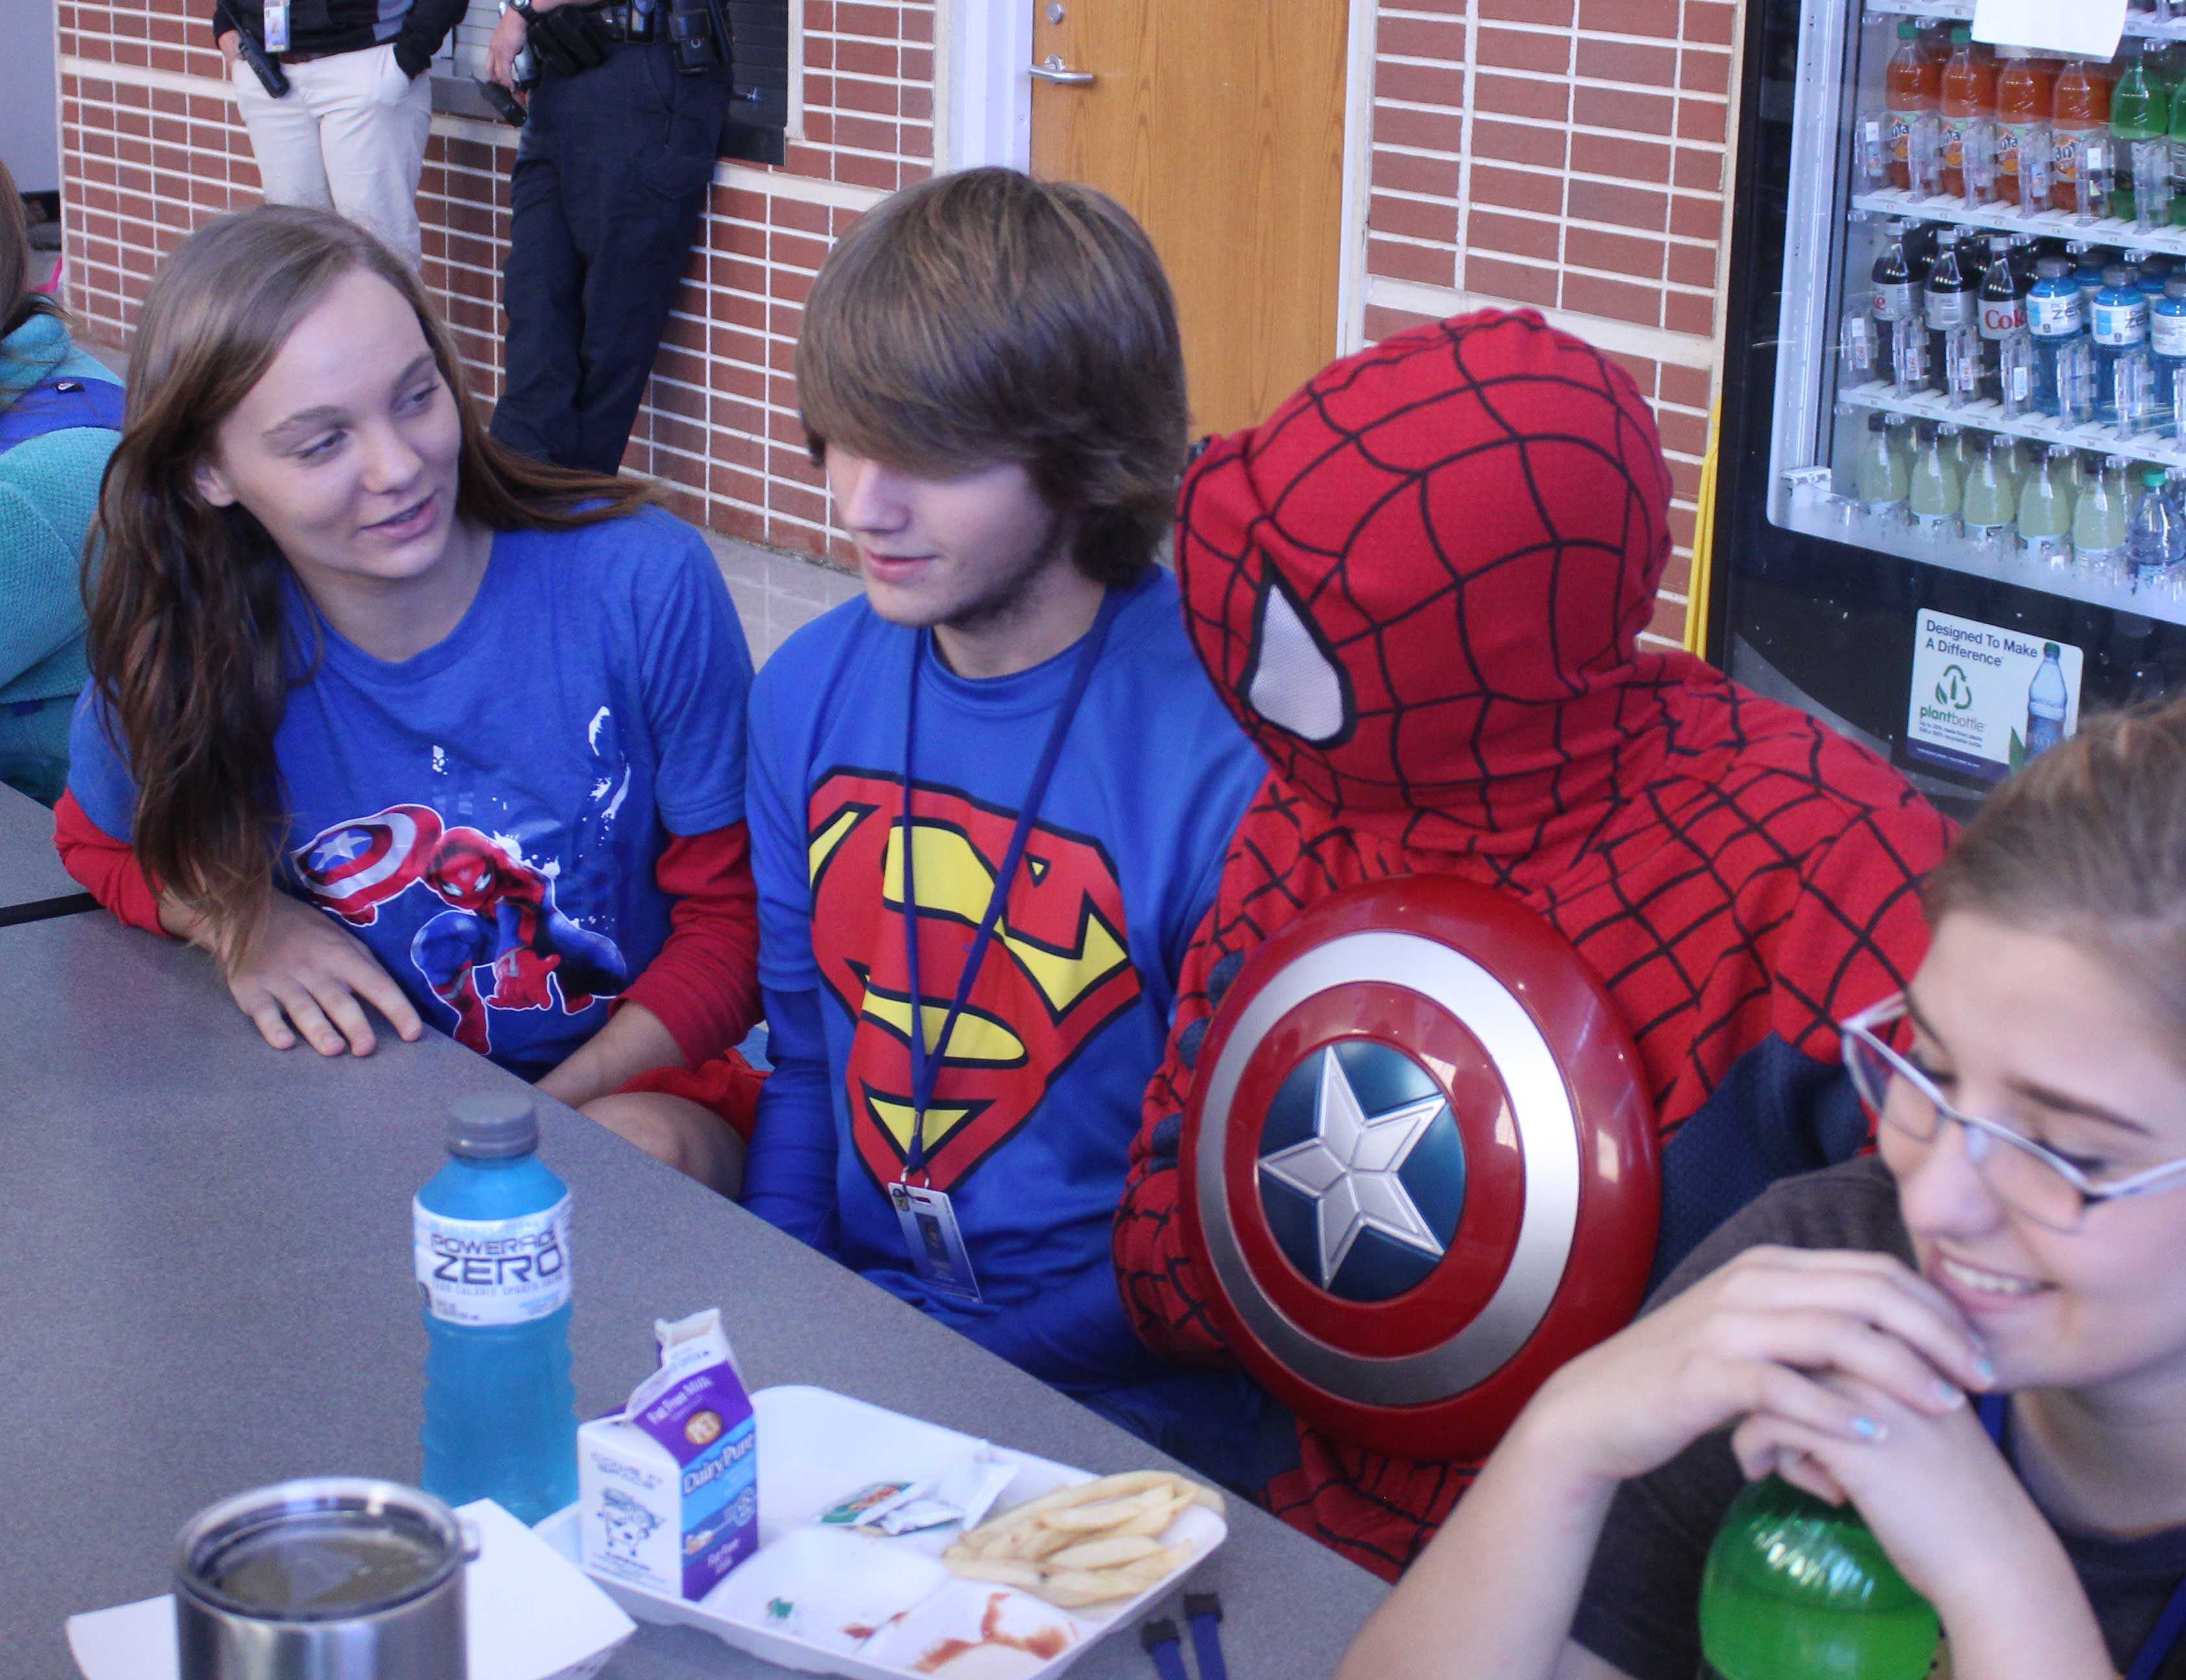 Students eat lunch in their DC and Marvel attire.